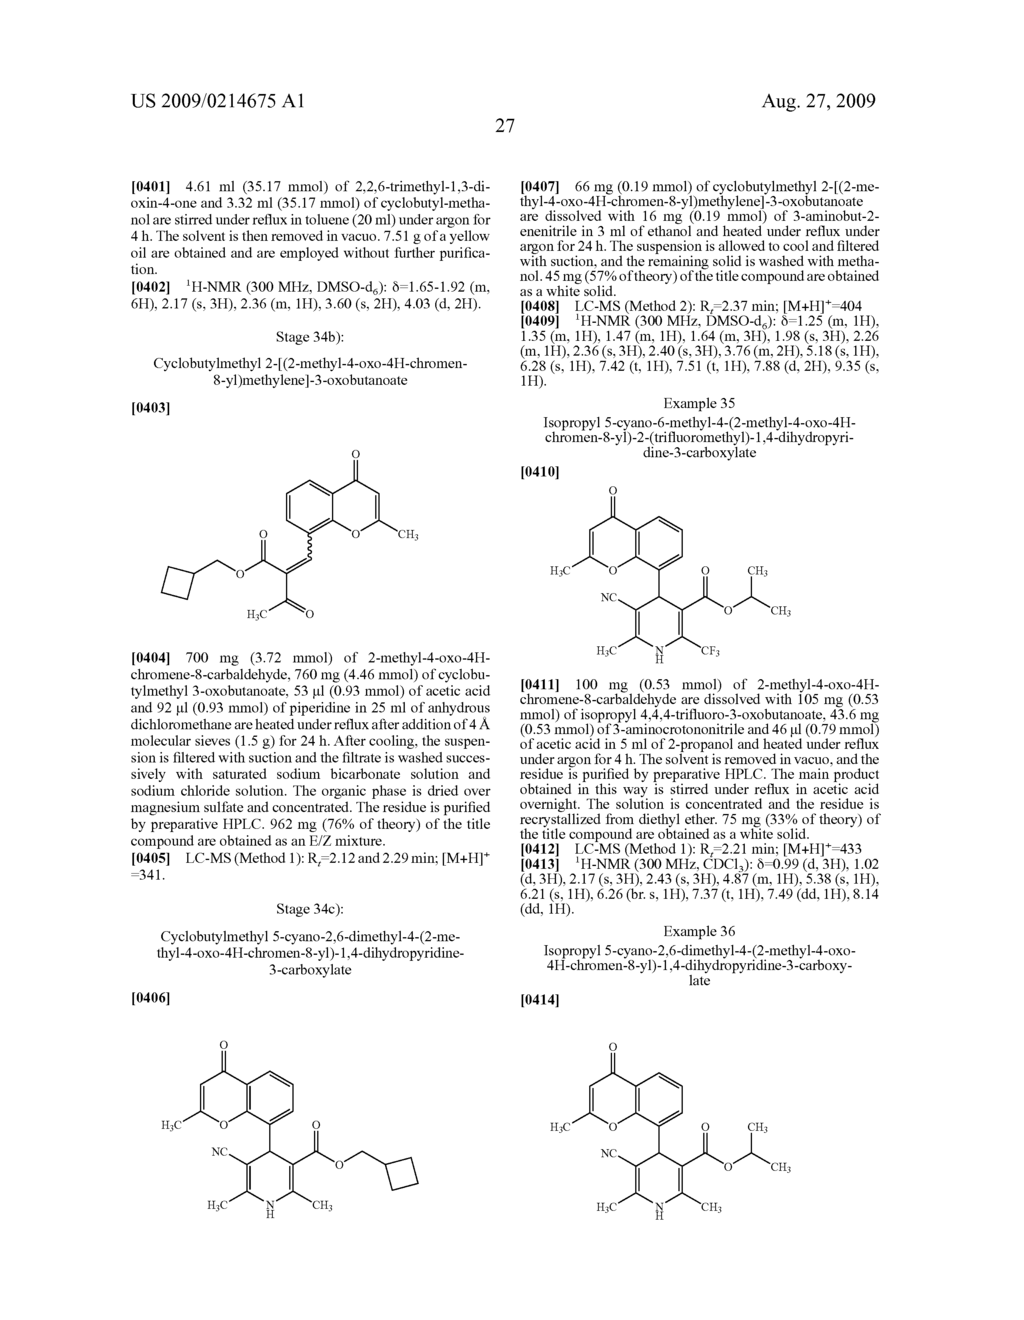 4-Chromenonyl-1,4-dihydropyridinecarbonitriles and the use thereof - diagram, schematic, and image 28